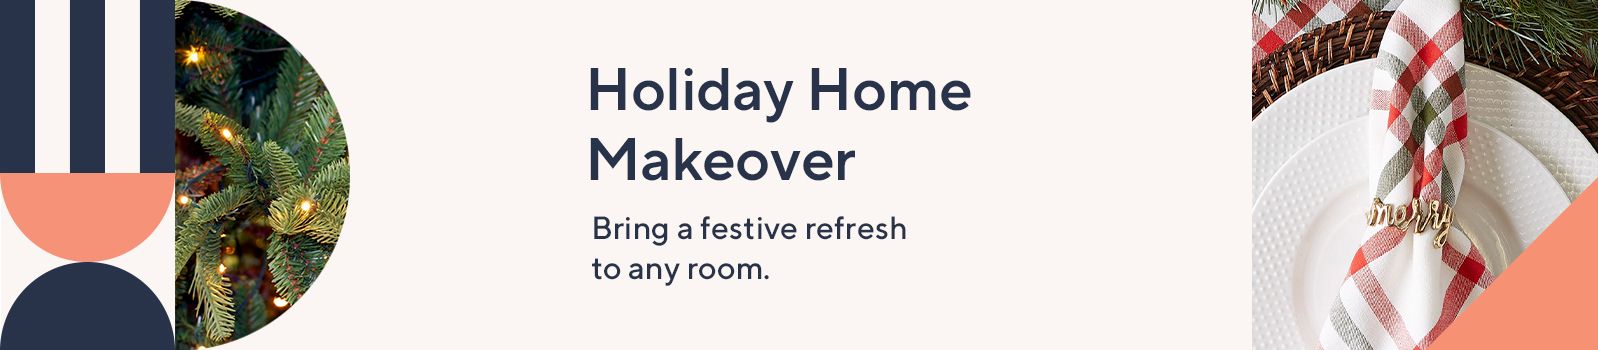 Holiday Home Makeover Bring a festive refresh to any room.